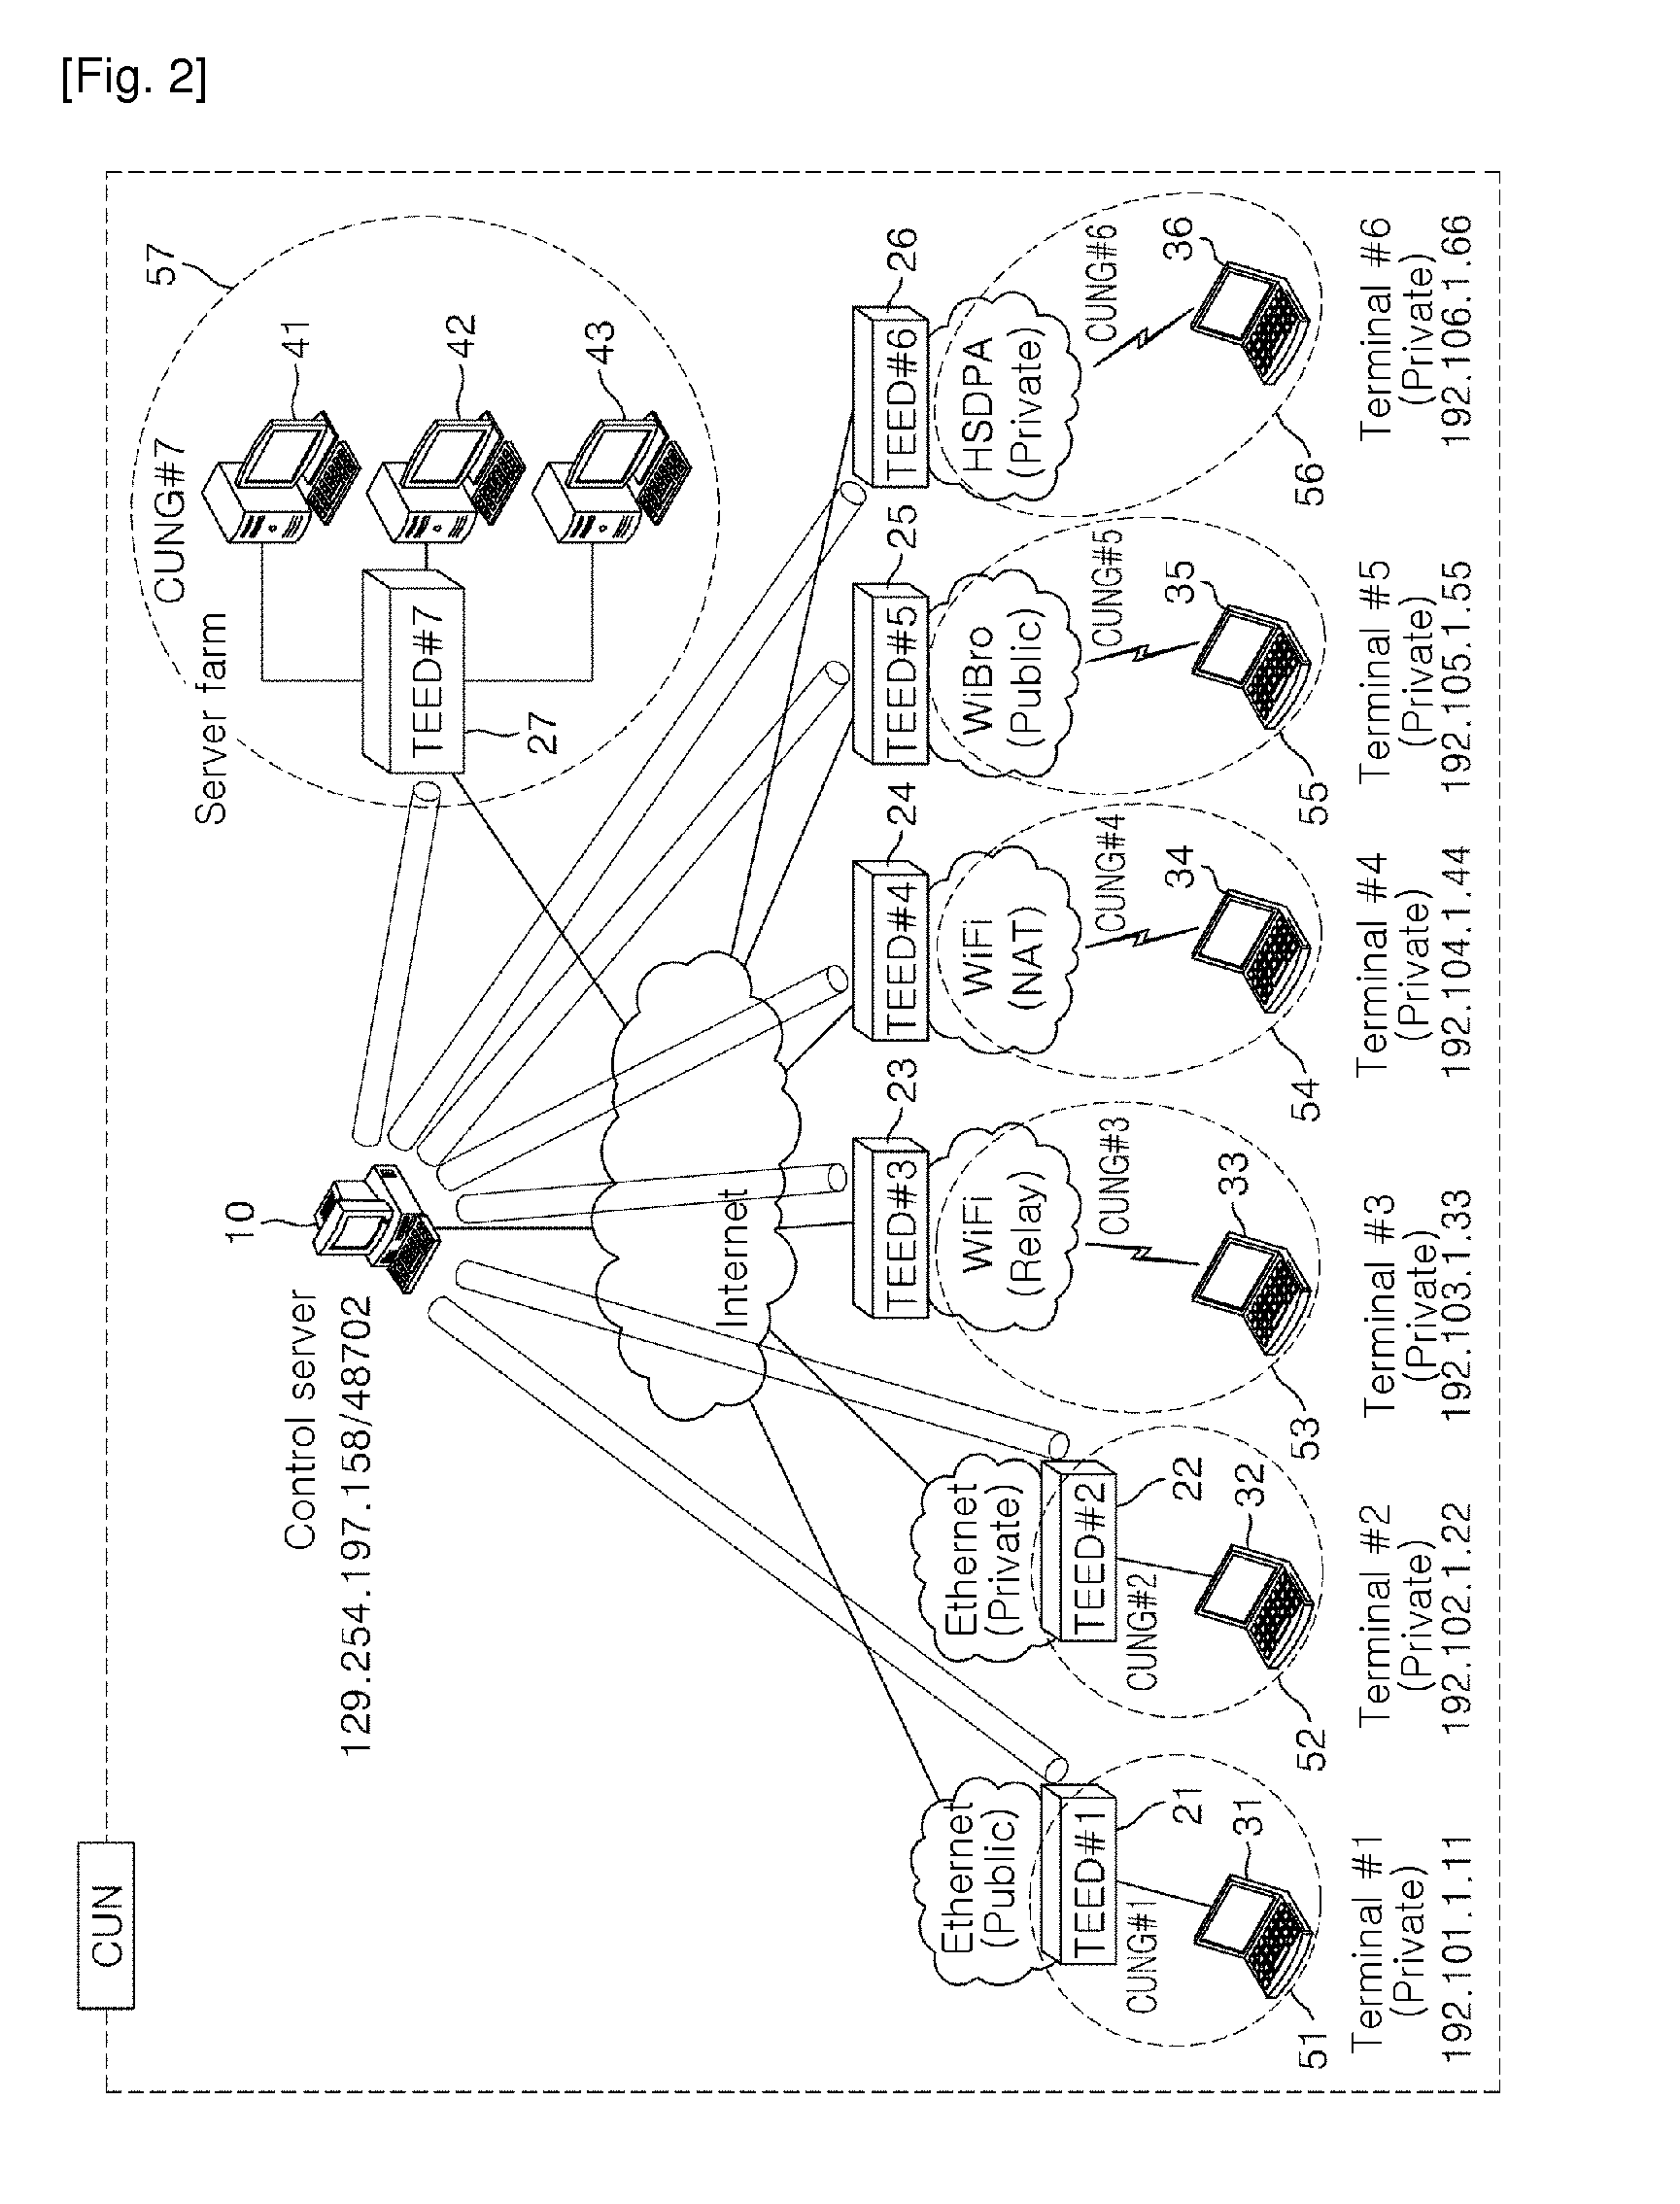 Method for configuring closed user network using IP tunneling mechanism and closed user network system